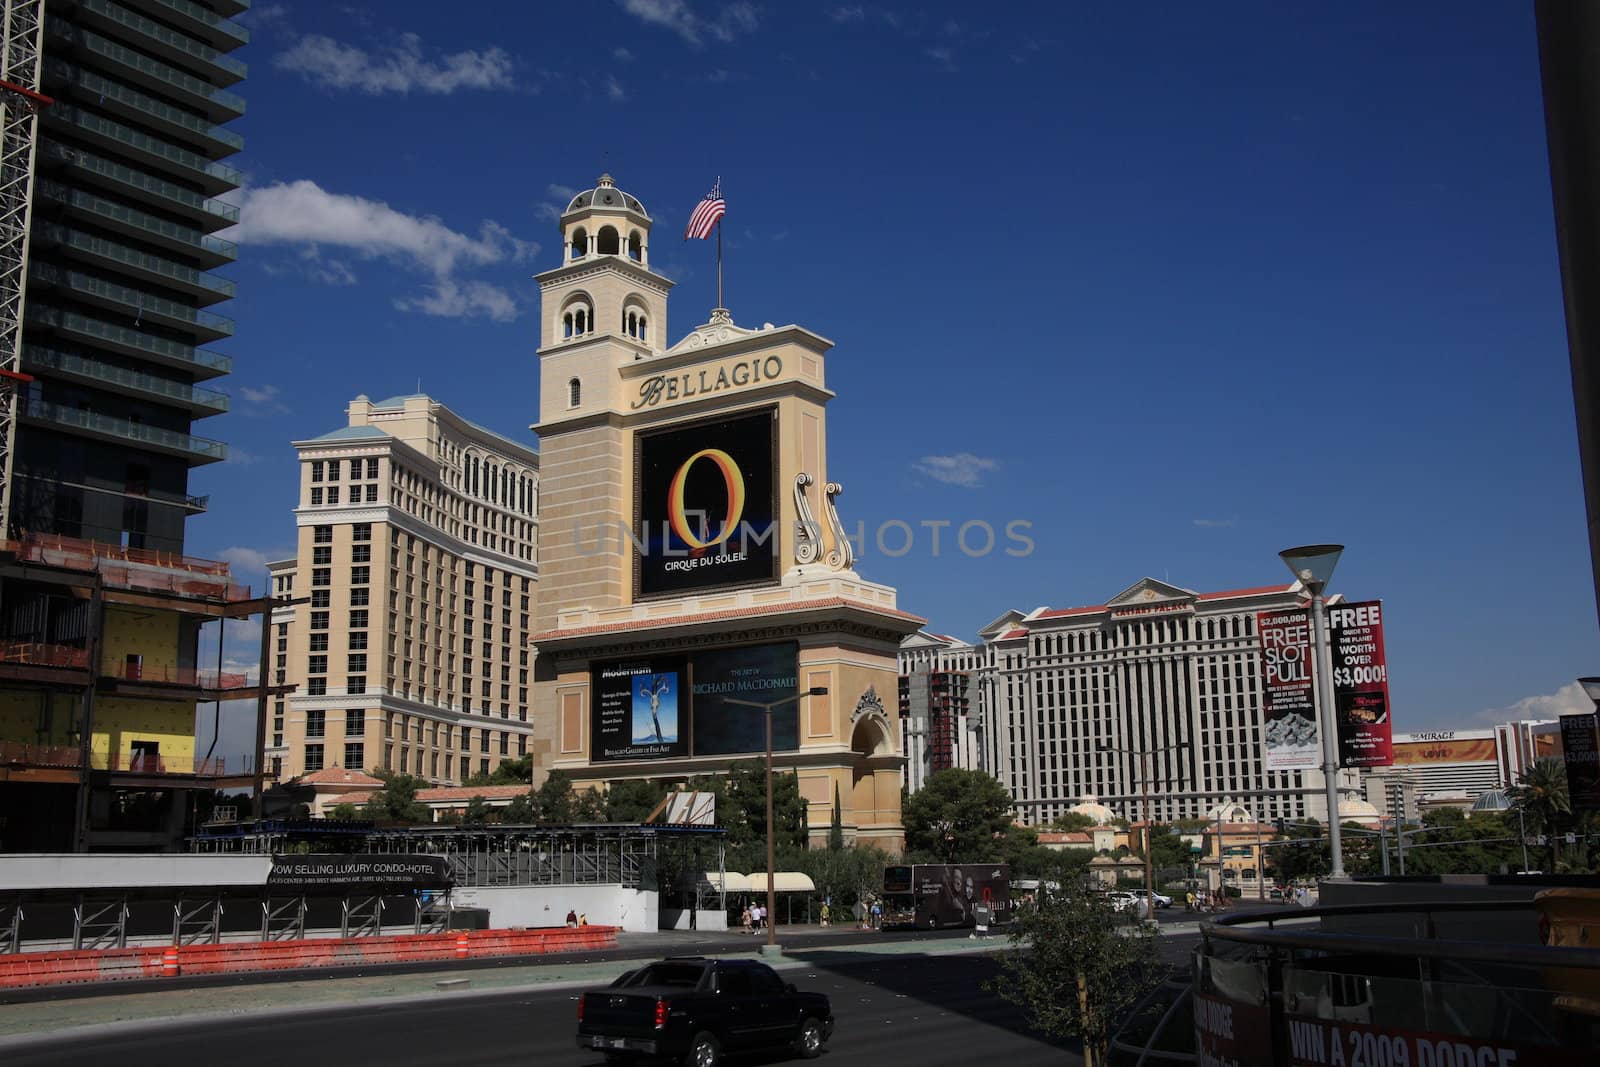 Las Vegas - Bellagio and Caesars Palace by Ffooter